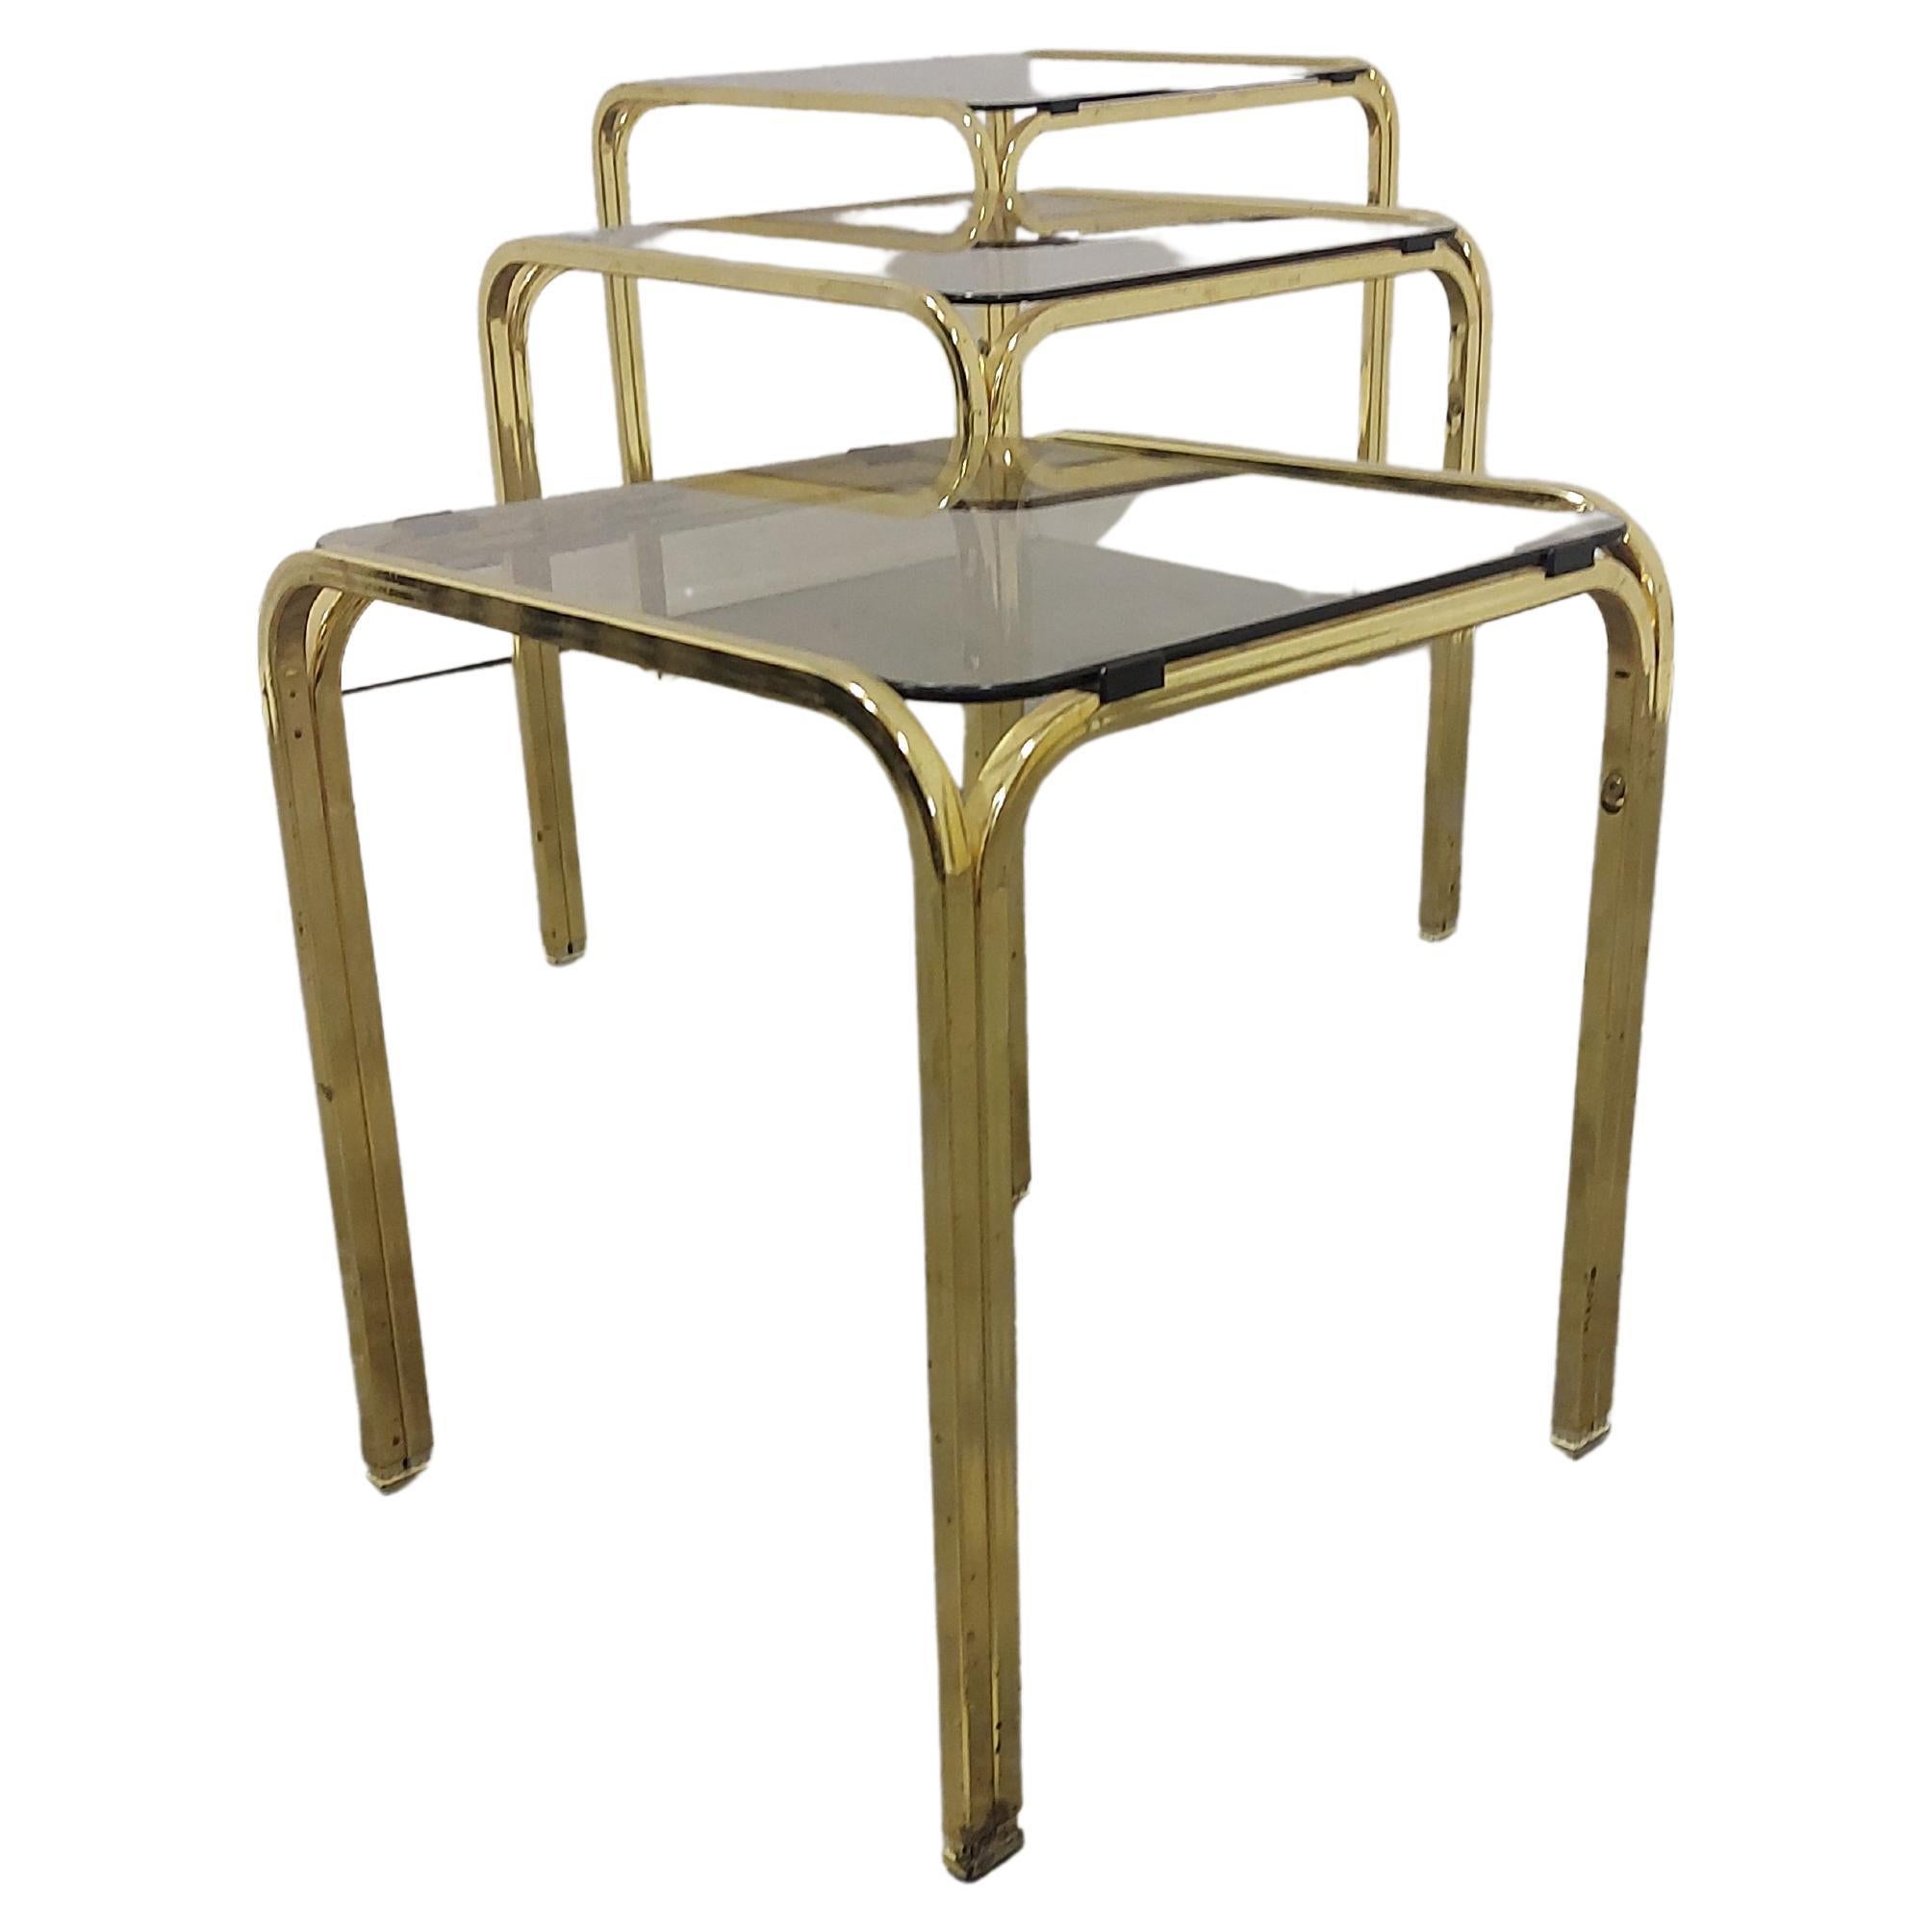 Brass and Smoked Glass Nesting Tables, Set of 3, 1970s For Sale